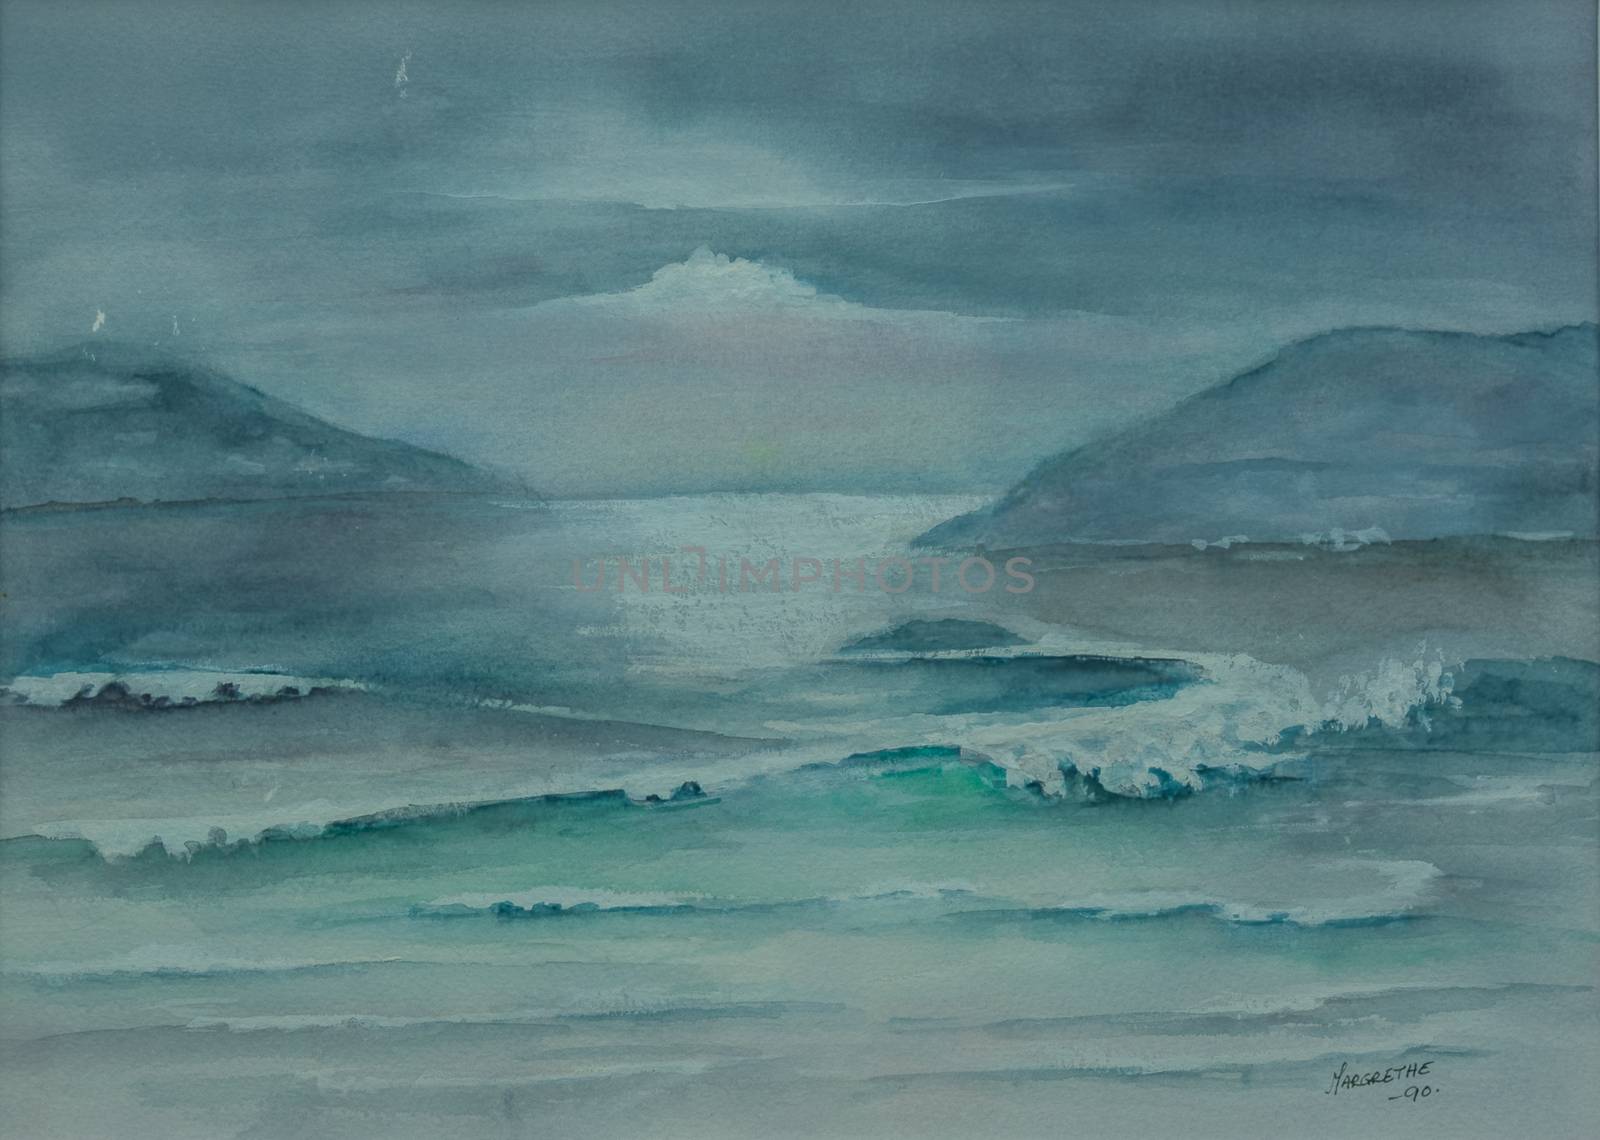 Scenery from the sea painted with watercolor. Fjord landscape from western Norway. Waves of the open sea. by QQJXw824zEfXDVTP9u